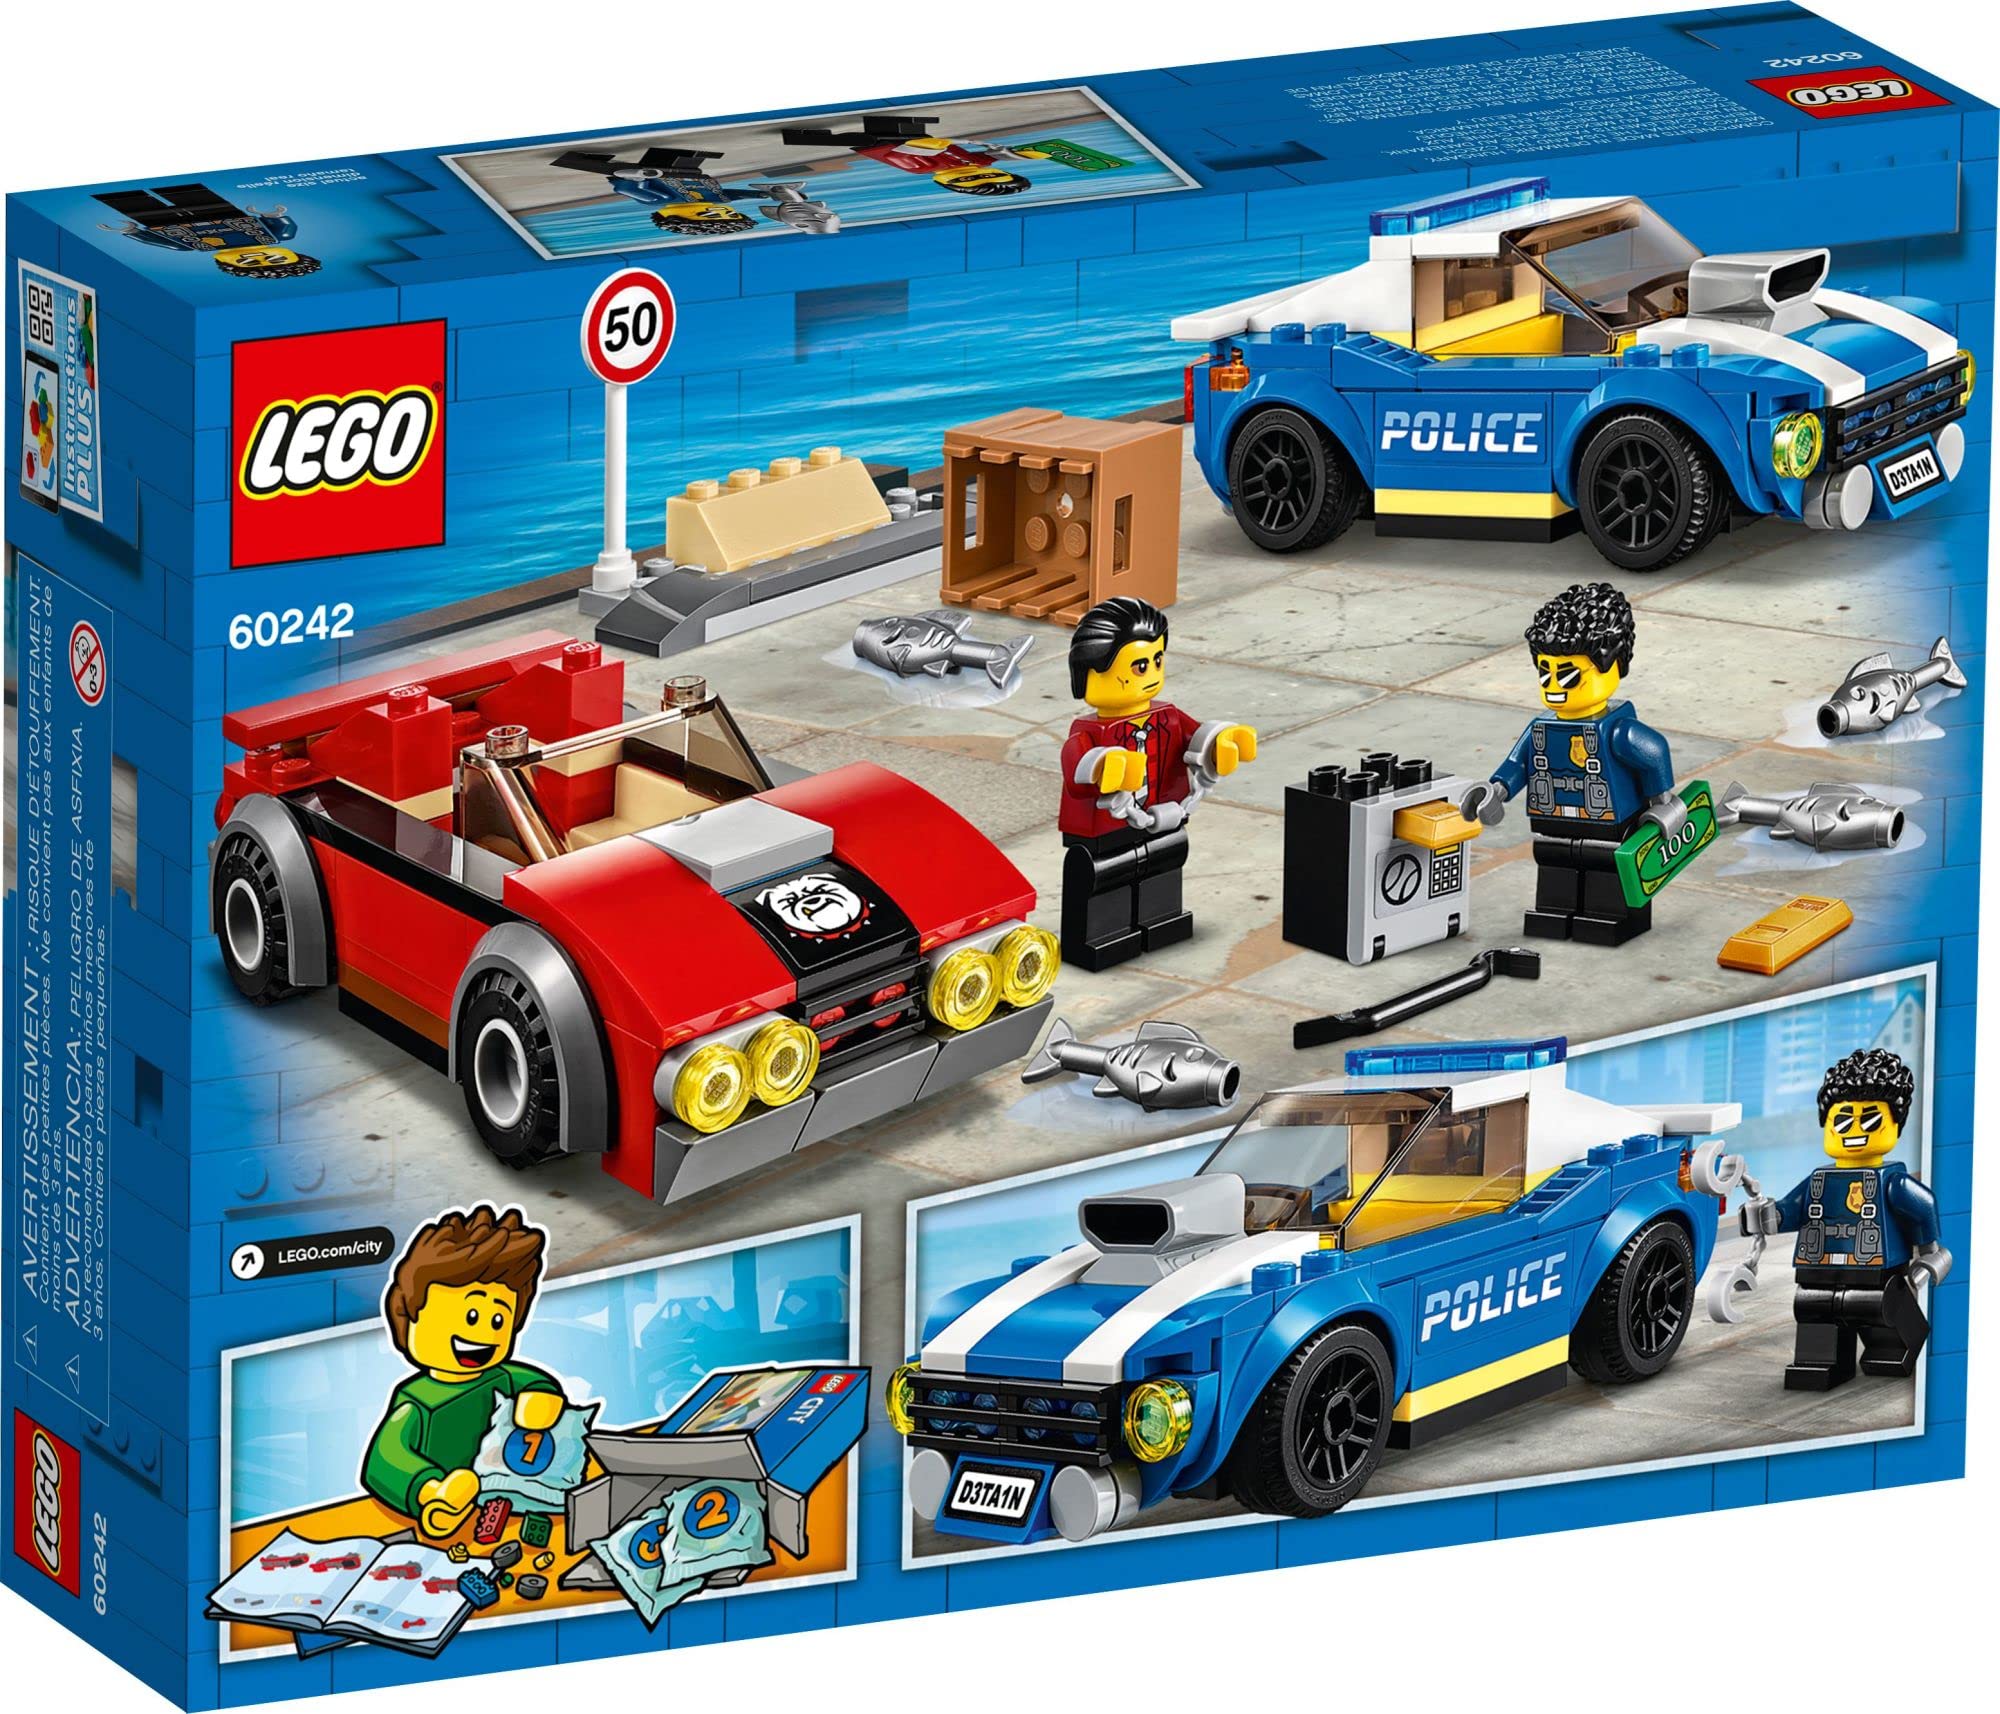 LEGO City Police Highway Arrest 60242 Police Toy, Fun Building Set for Kids (185 Pieces)